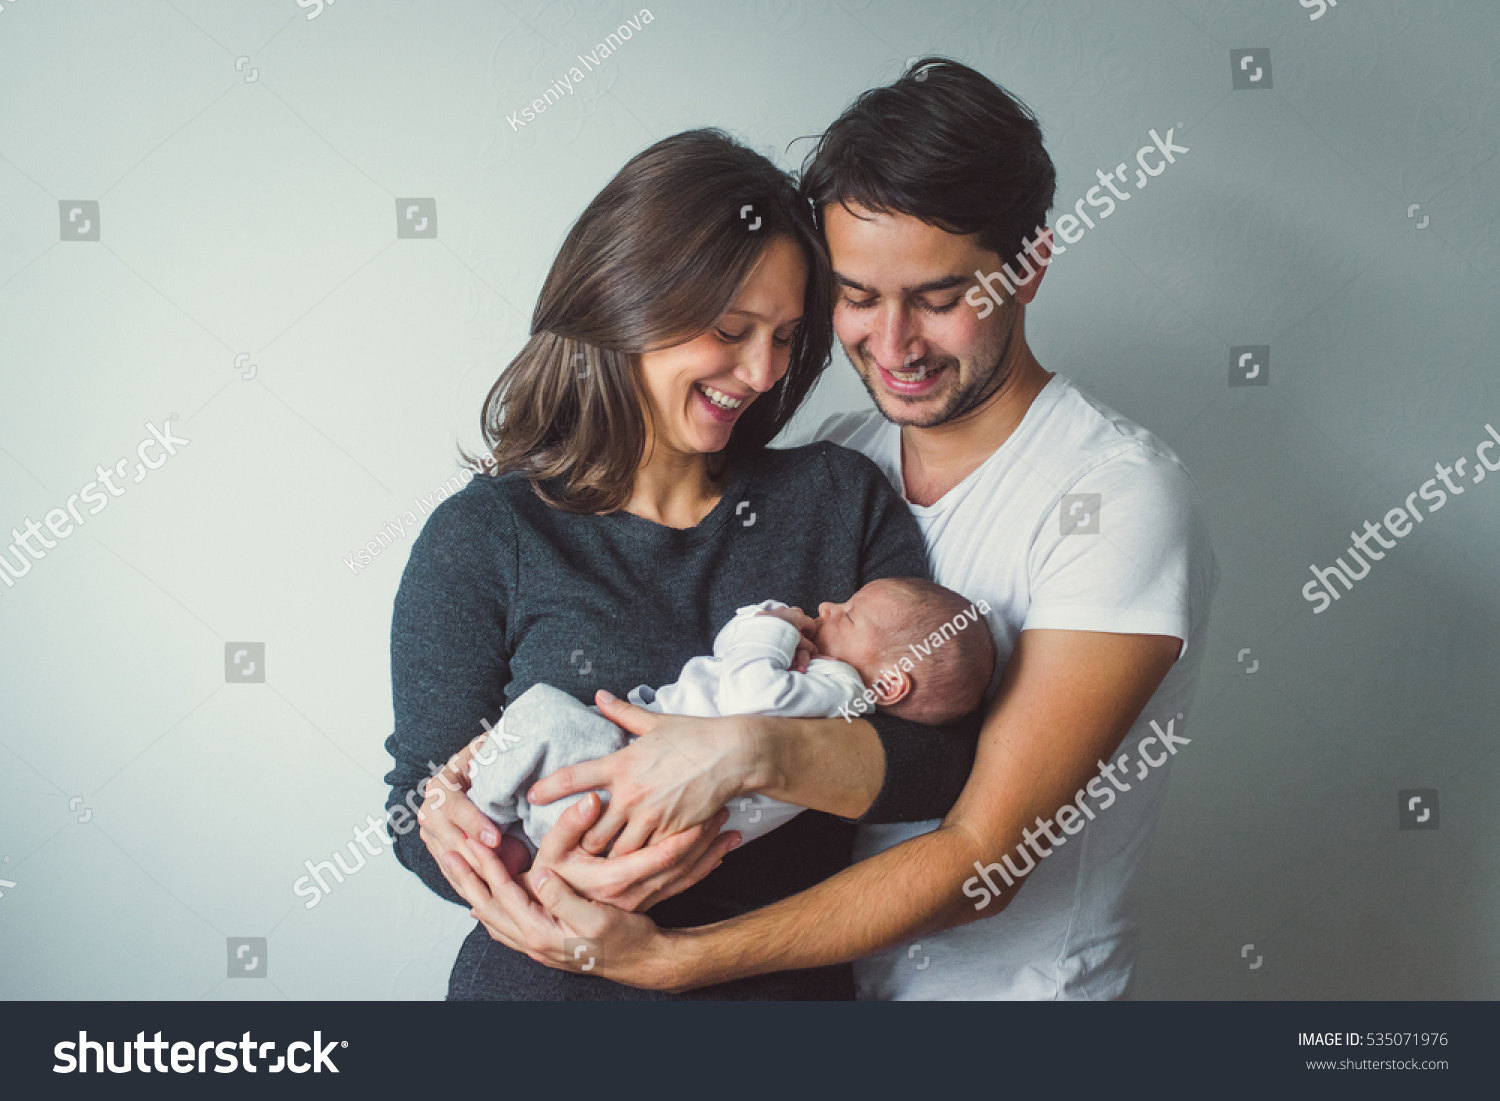 Woman and man holding a newborn. Mom, dad and baby. Close-up. Portrait of young smiling family with newborn on the hands. Happy family on a background.  #535071976